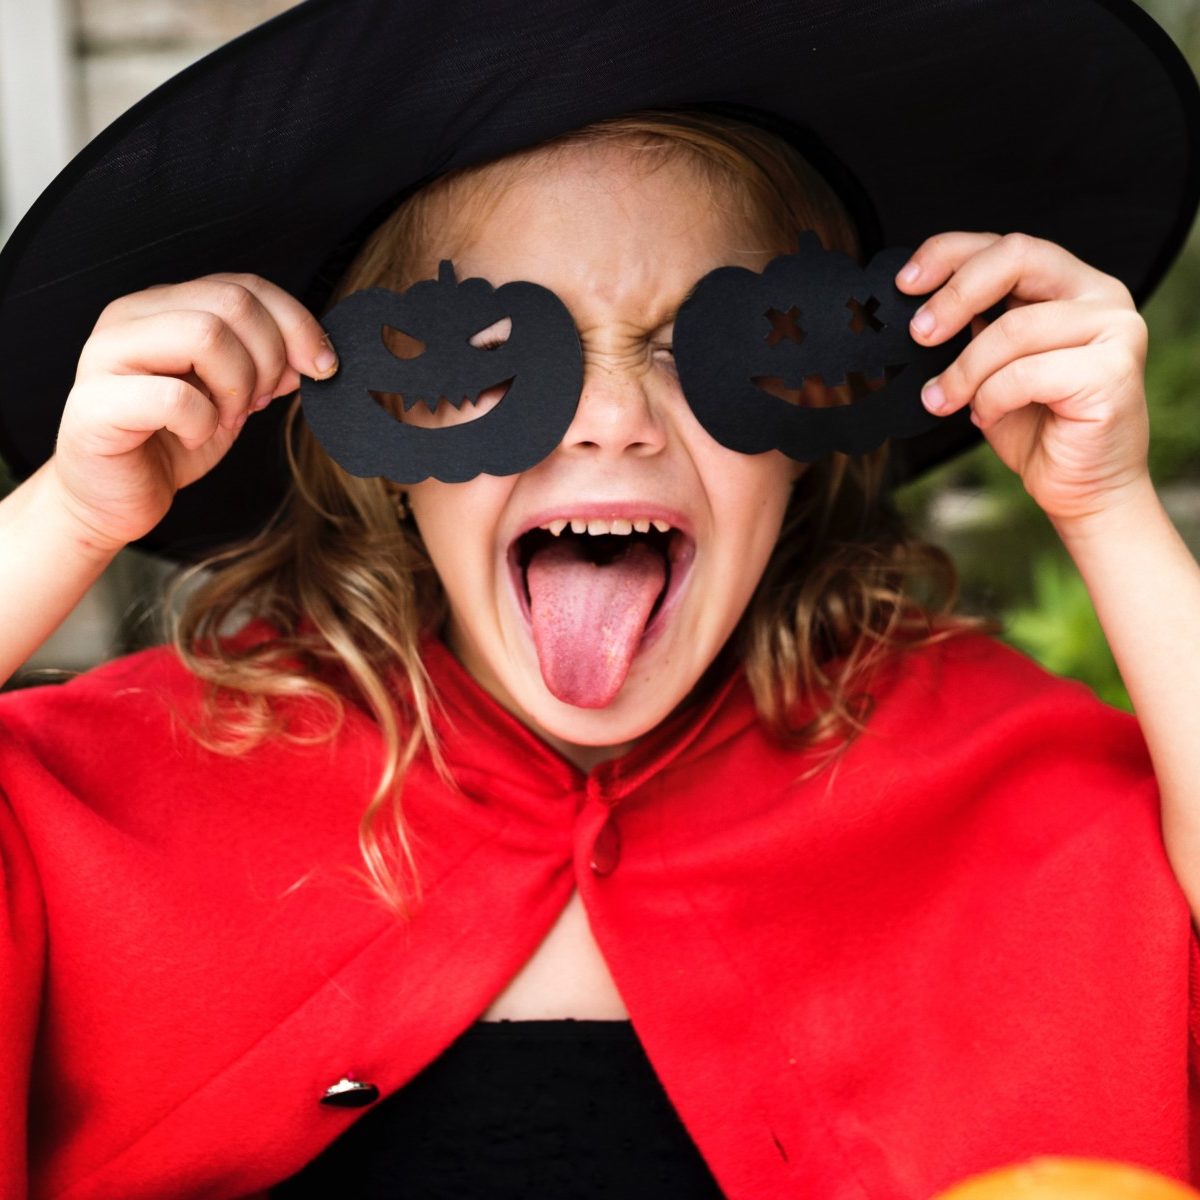 Child in costume with Halloween pumpkin glasses